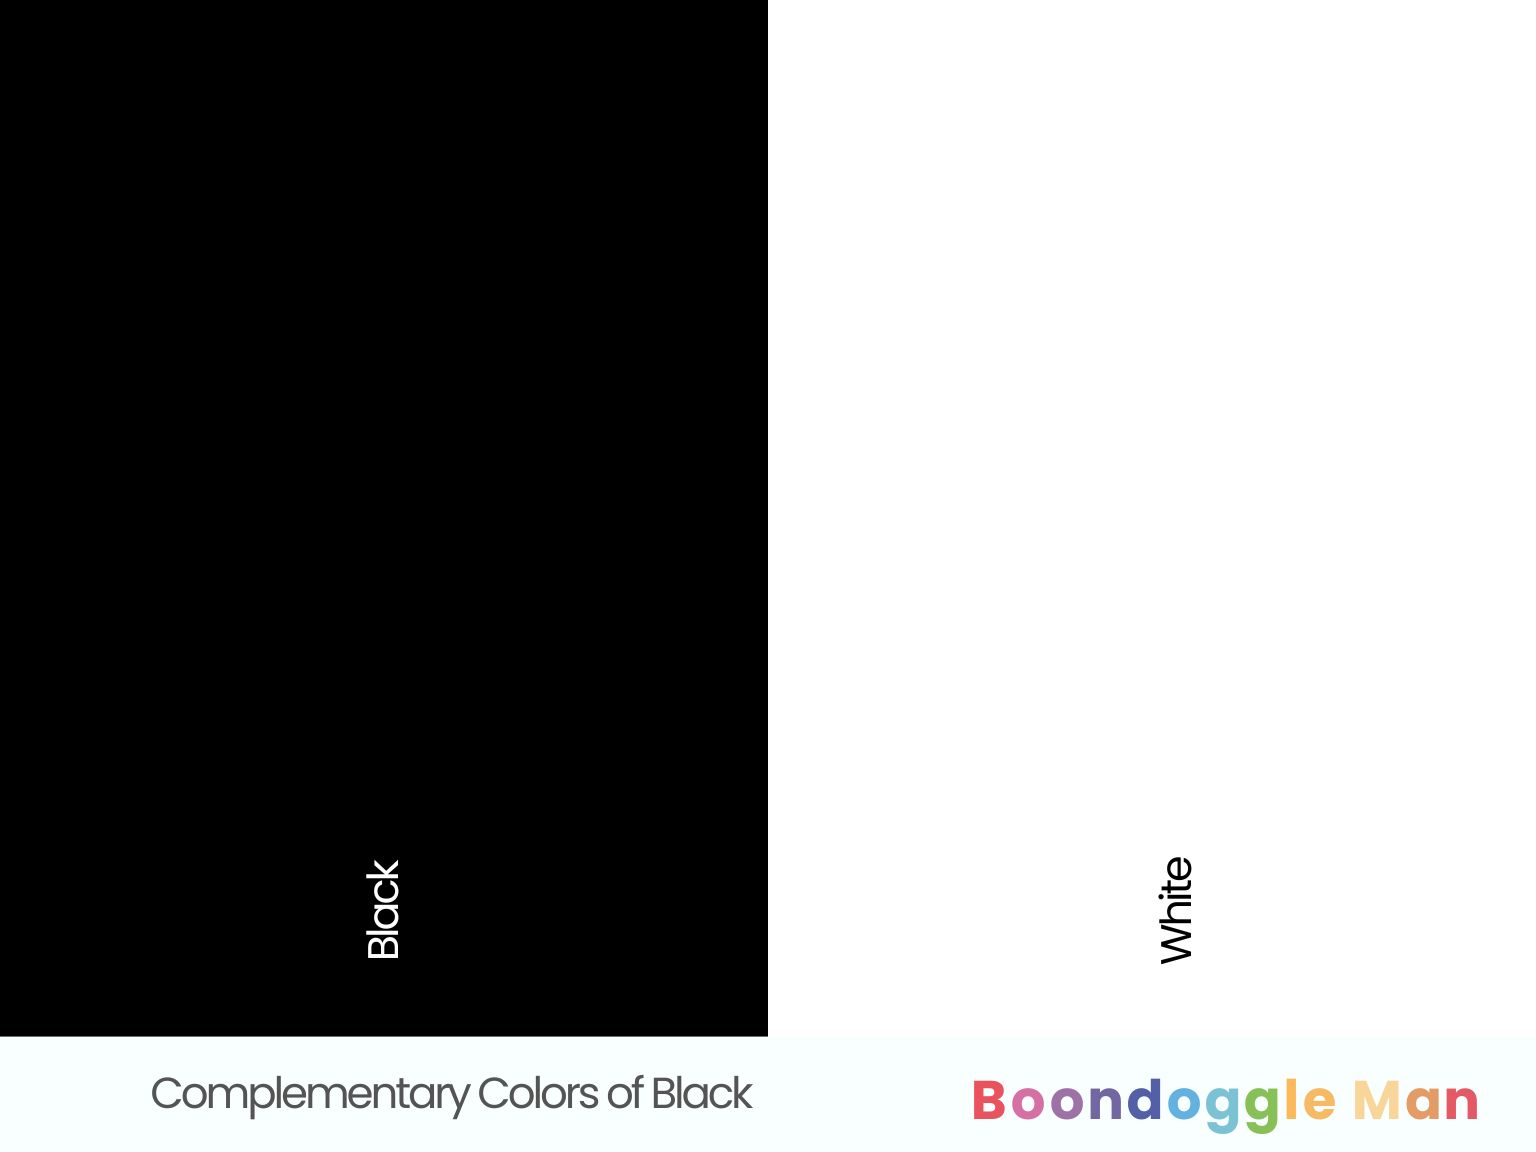 Complementary Colors of Black